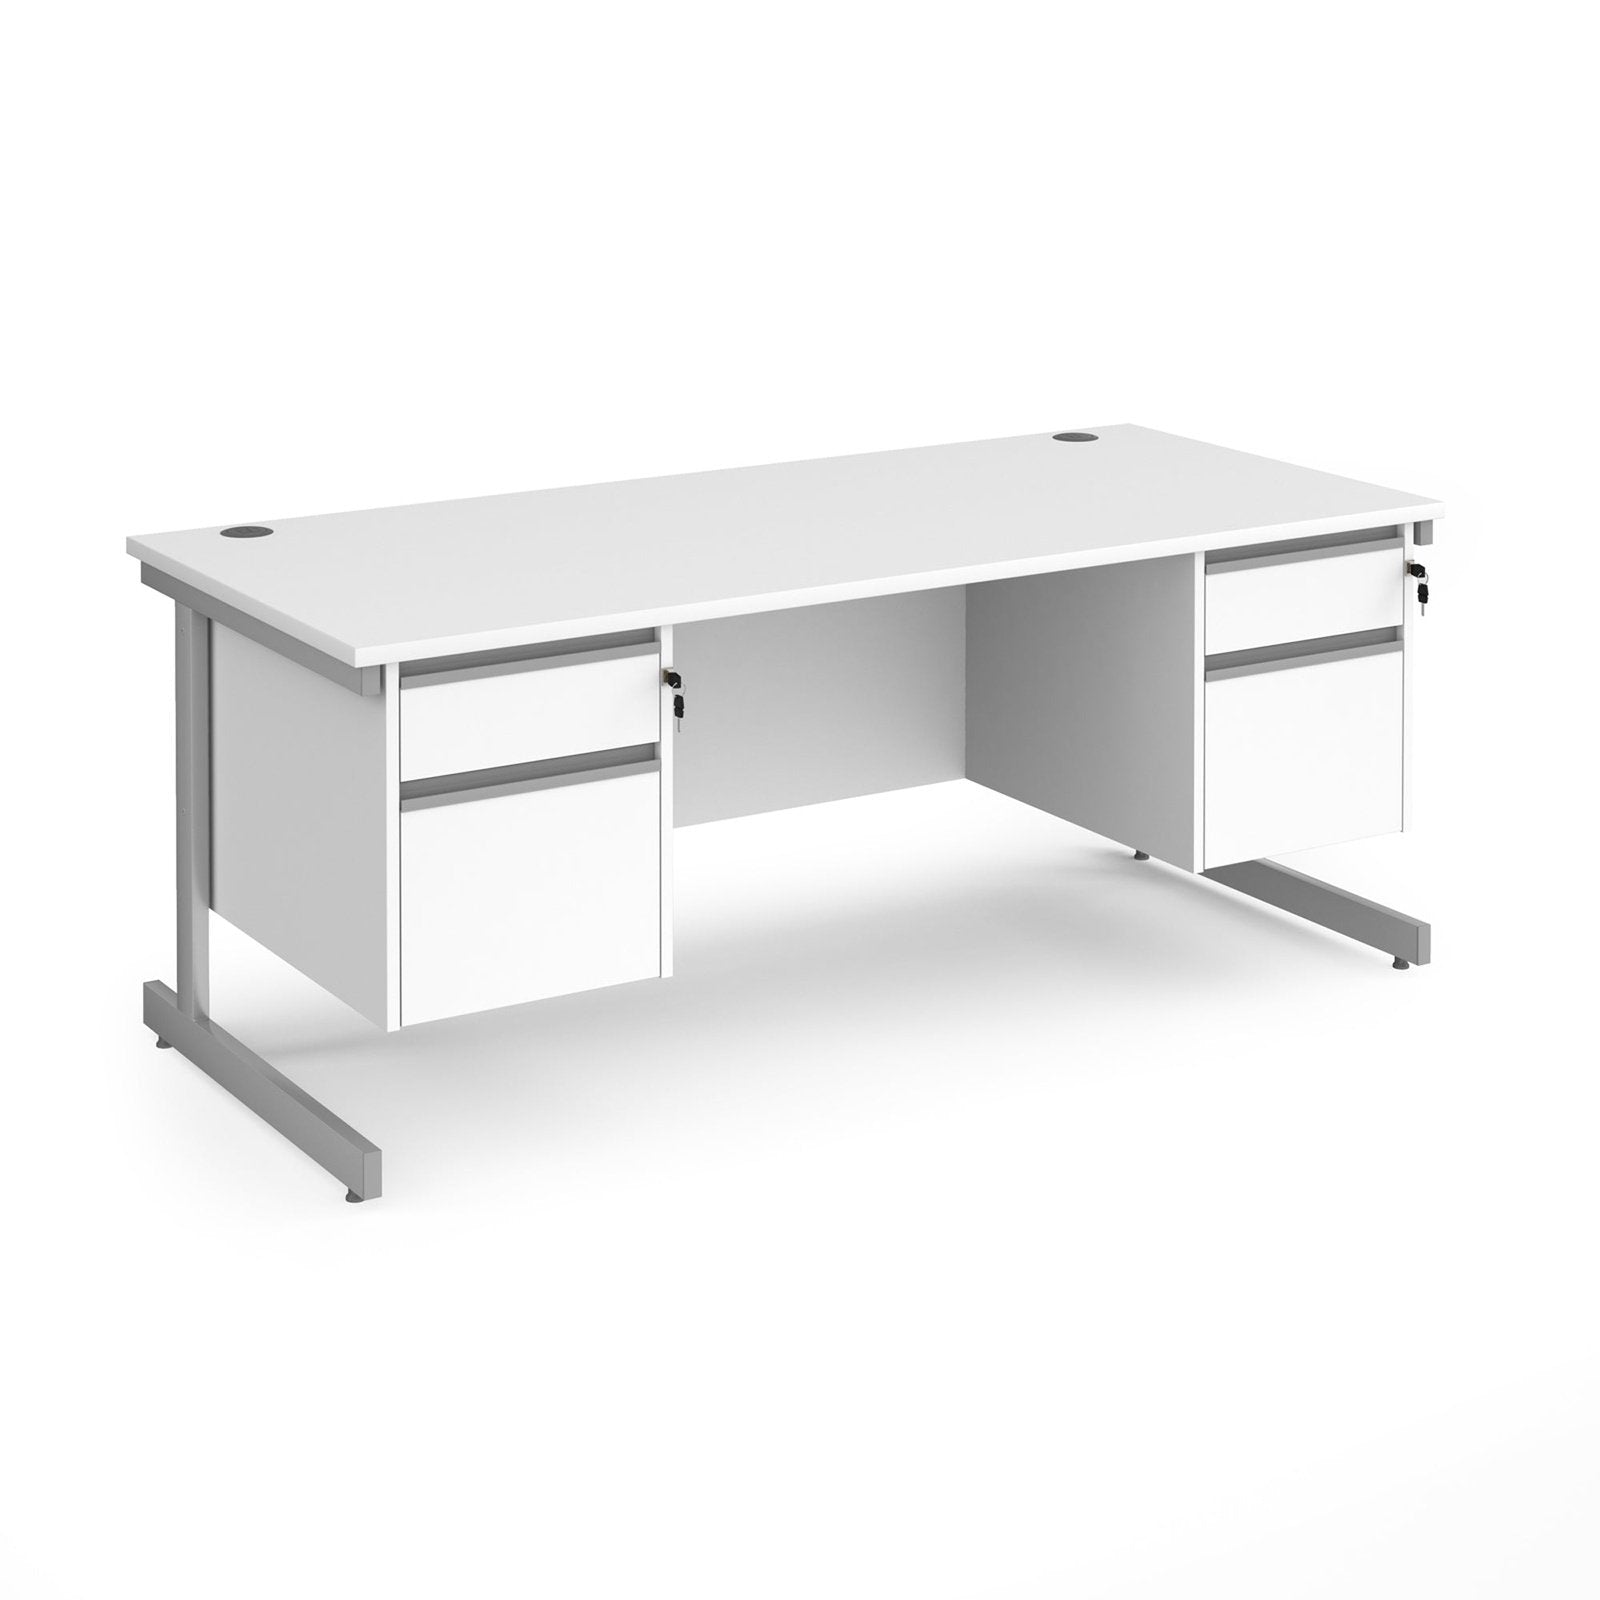 Contract 25 straight desk with 2 drawer pedestals and cantilever leg - Office Products Online